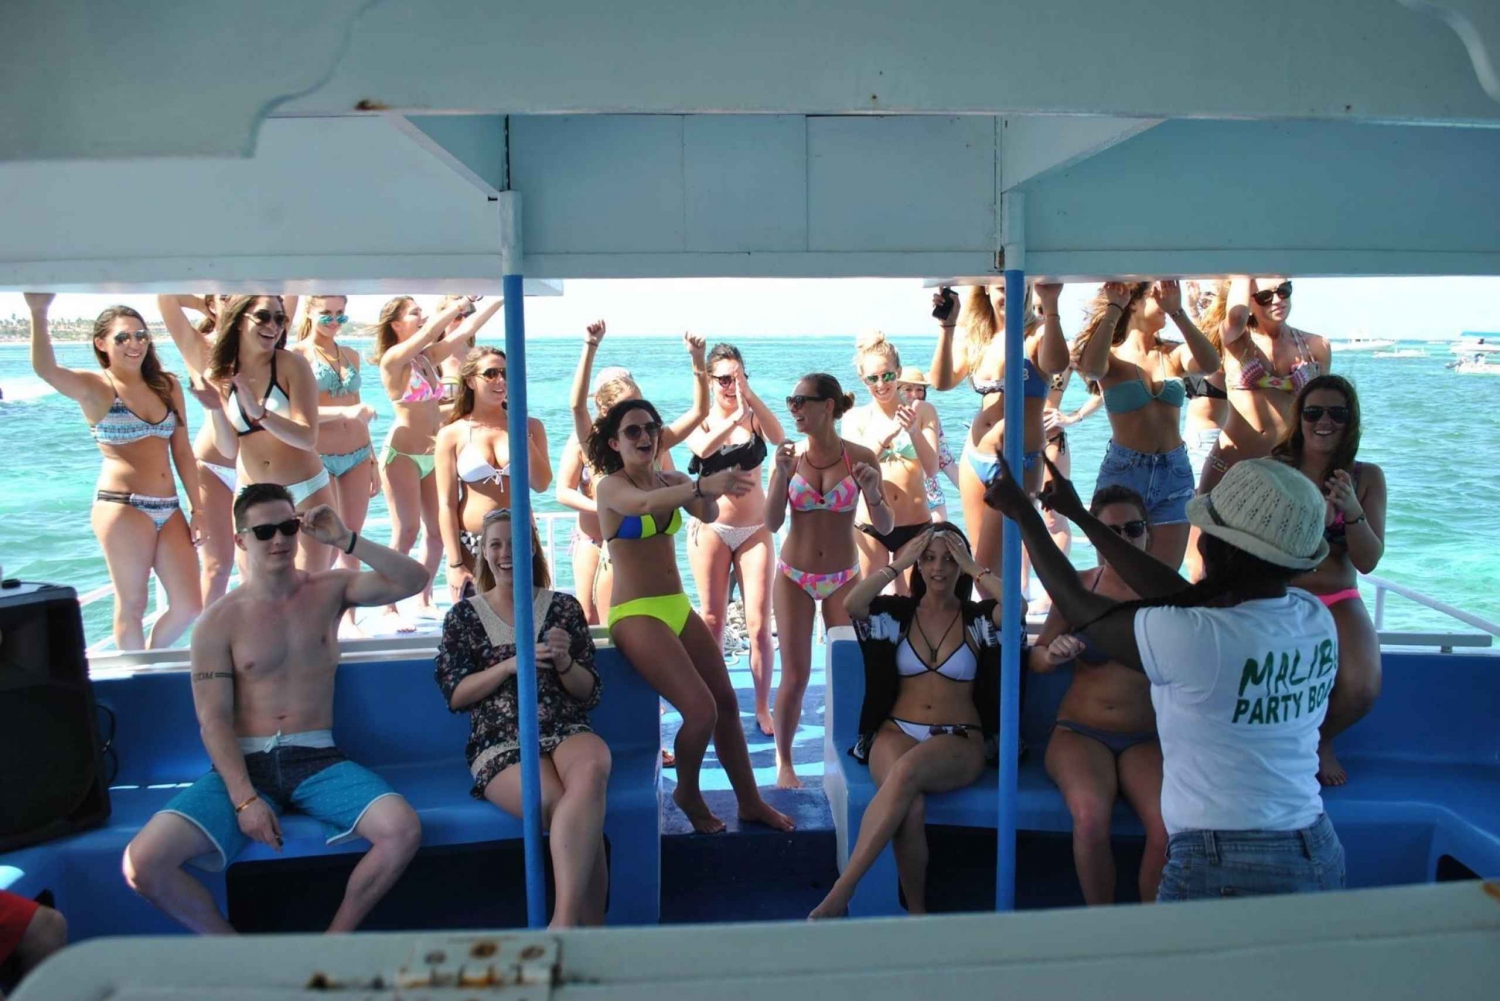 Party Boat: All Inclusive w/ Music, Dancing & Snorkeling